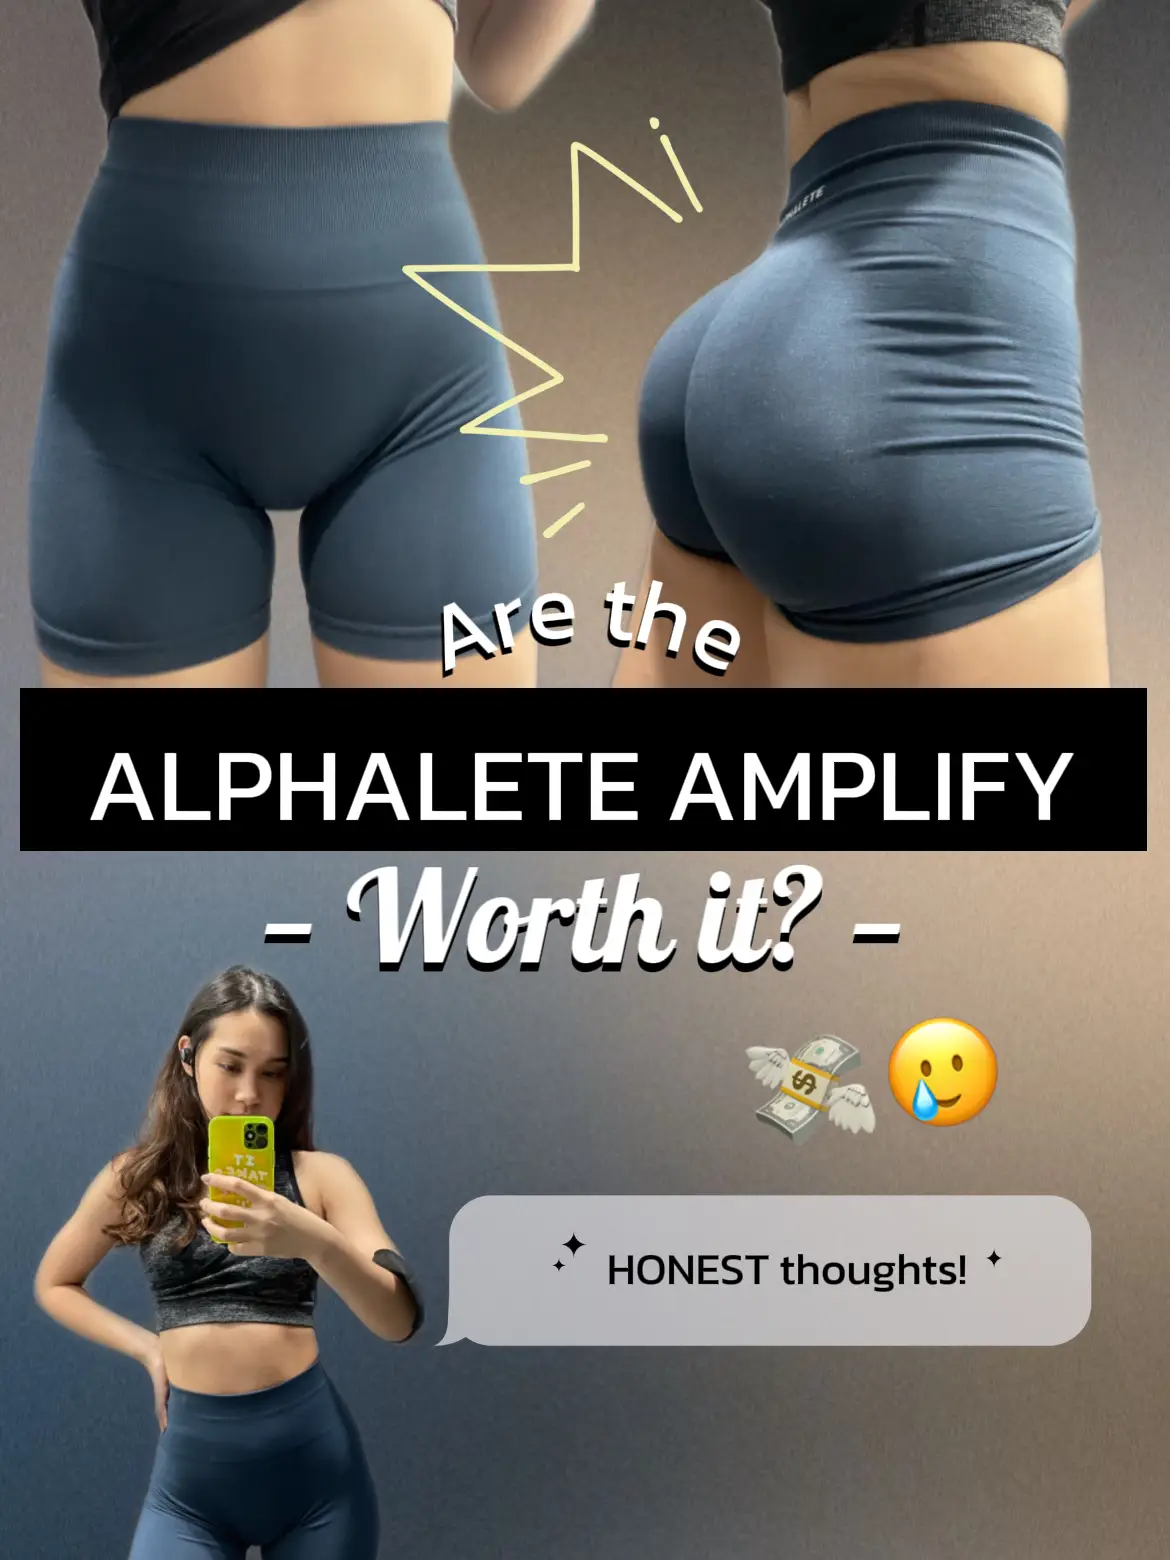 The truth is, one of them is the actual Alphalete amplify leggings 😂